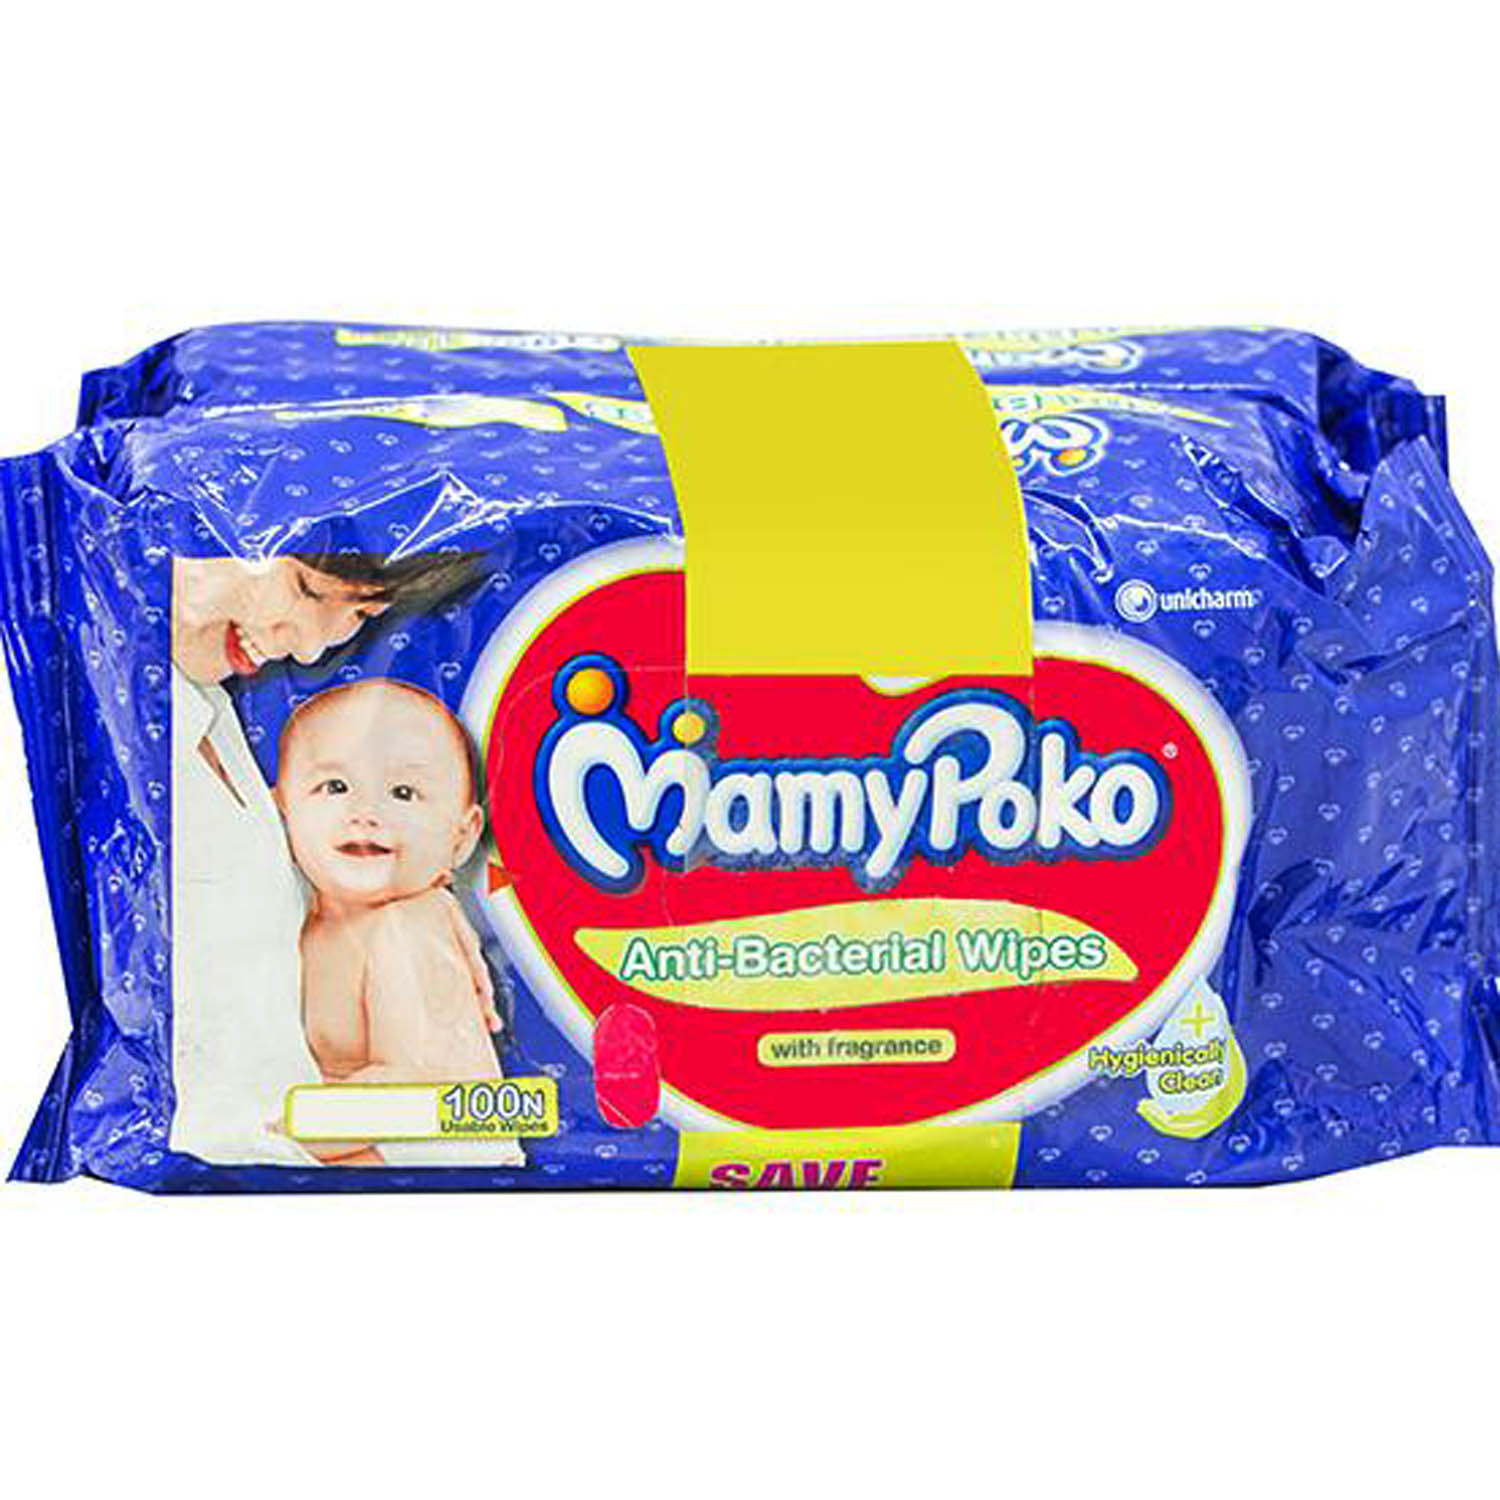 MamyPoko Anti-Bacterial Wipes, 200 Count (2 x 100 Wipes), Pack of 1 